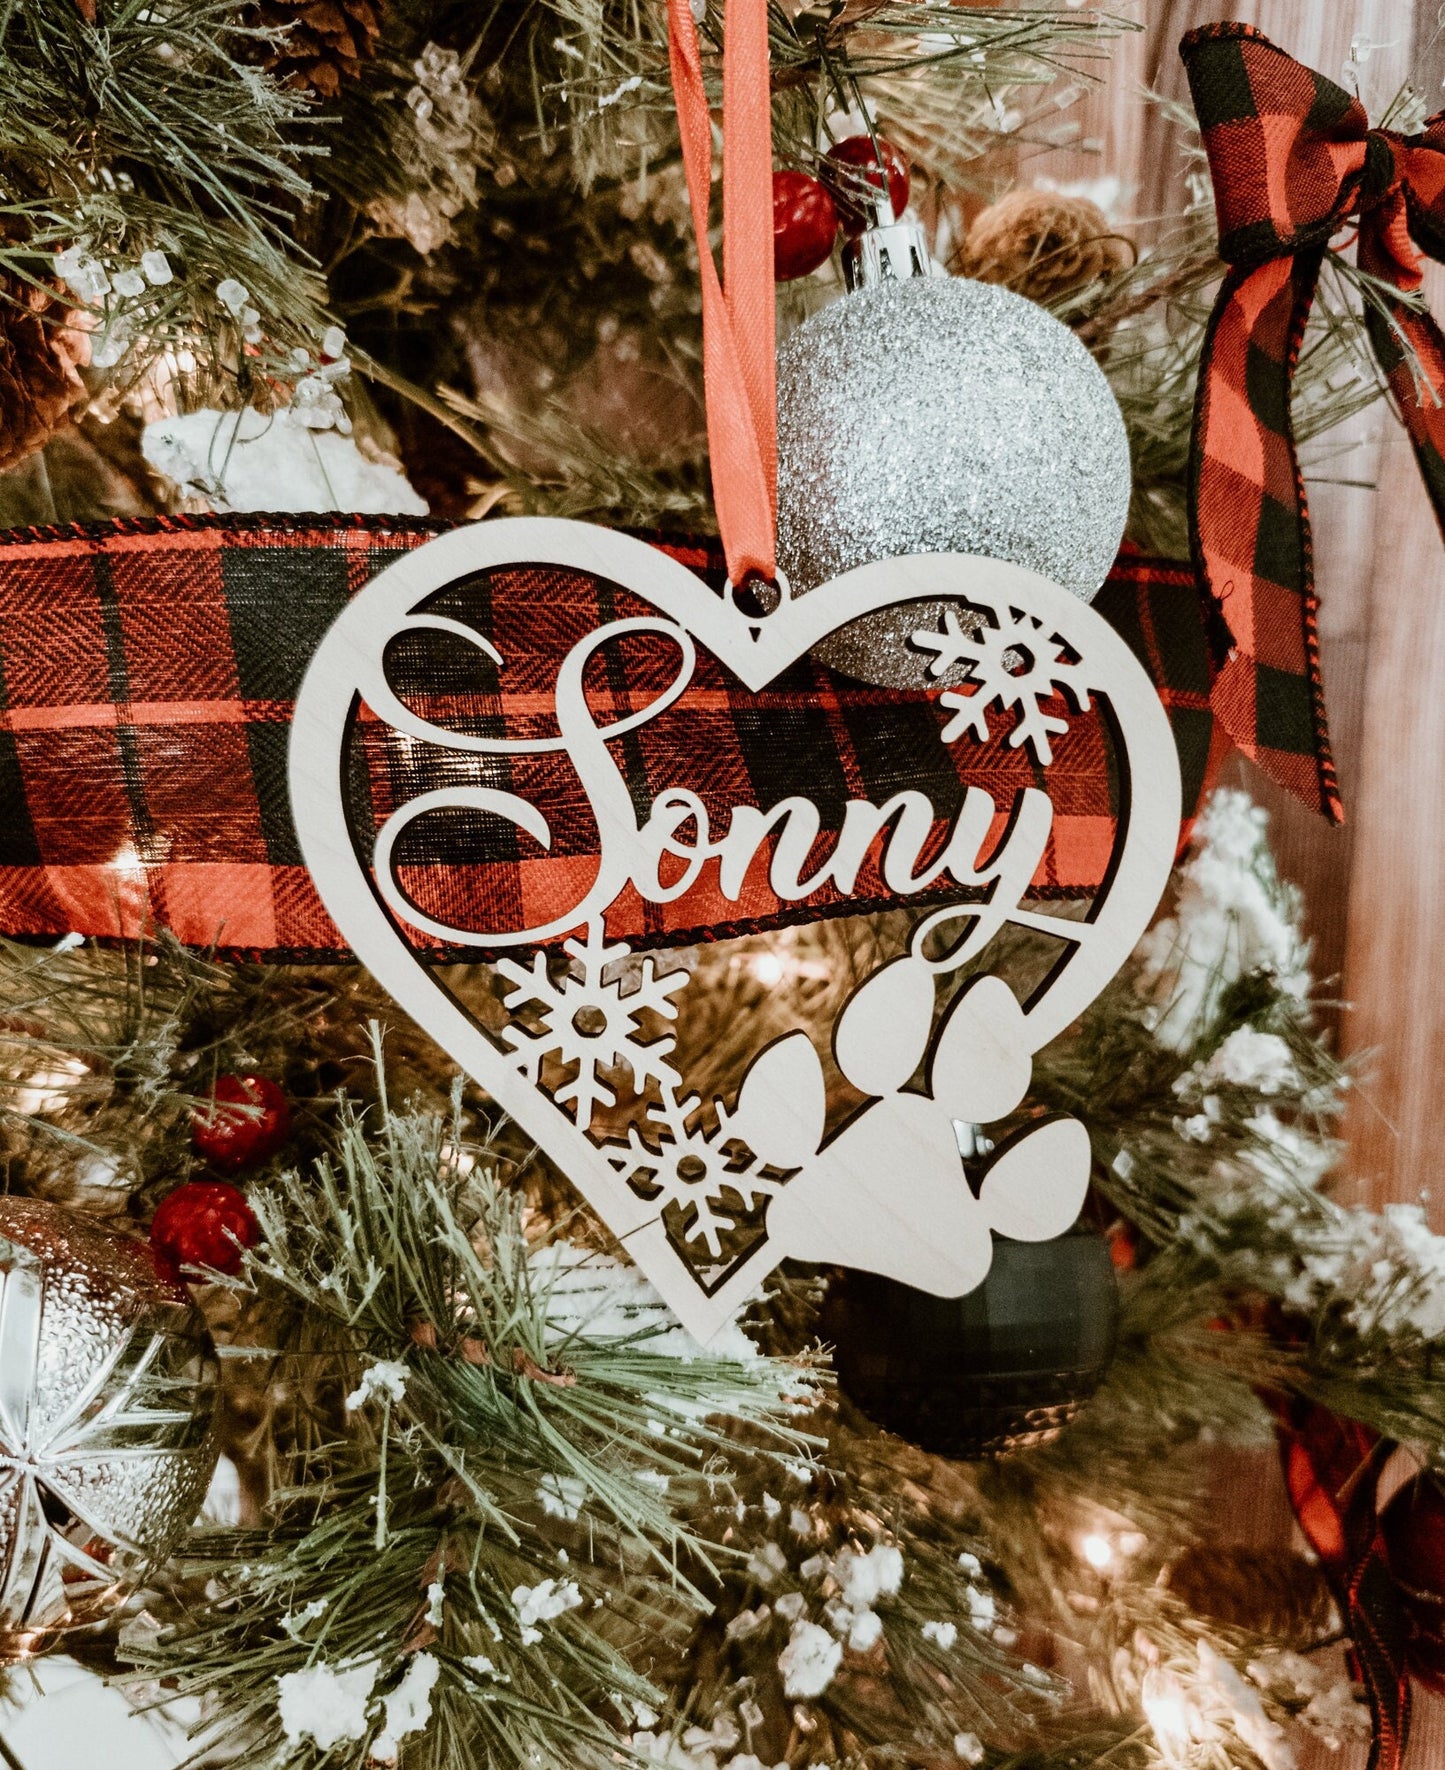 Personalized Pet Paw Print Christmas Ornament in Heart, Custom Dog or Cat Print xmas Tree Ornaments, Wooden Stocking Name Tags For Pet Decor